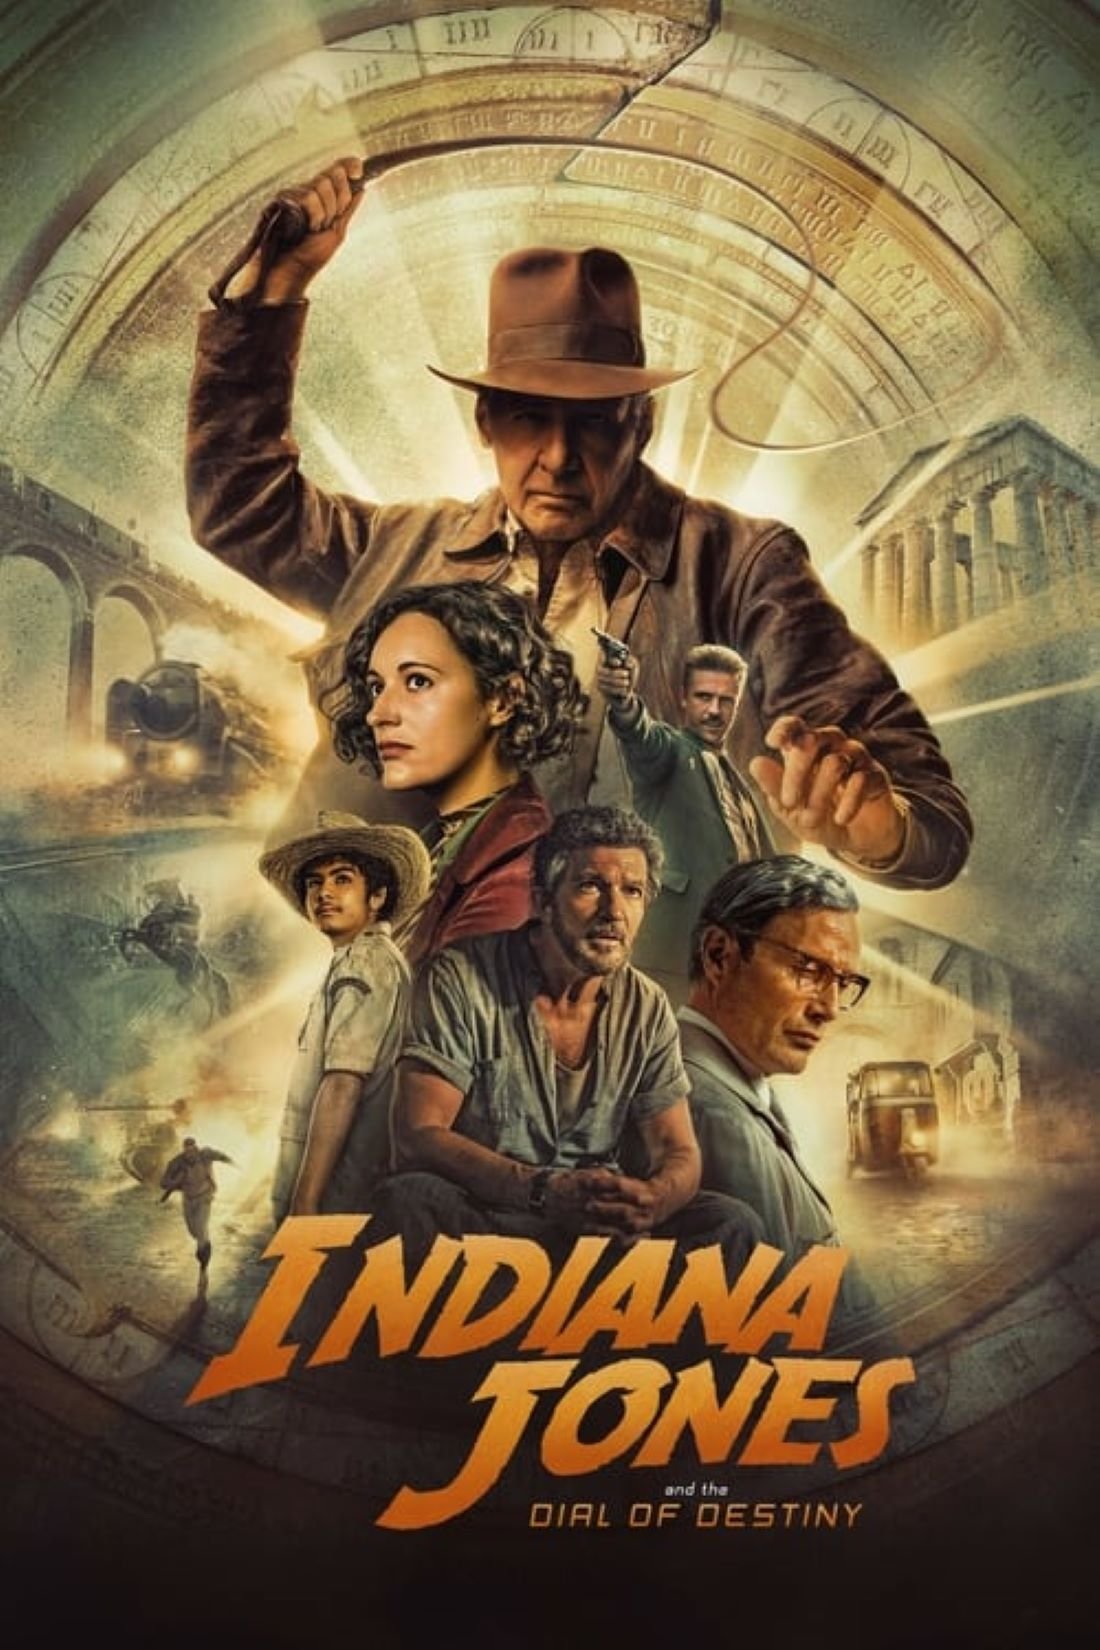 Download Indiana Jones and the Dial of Destiny (2023) 720p + 1080p + 2160p 4K MA WEB-DL x265 10bit HEVC English DDP 5.1